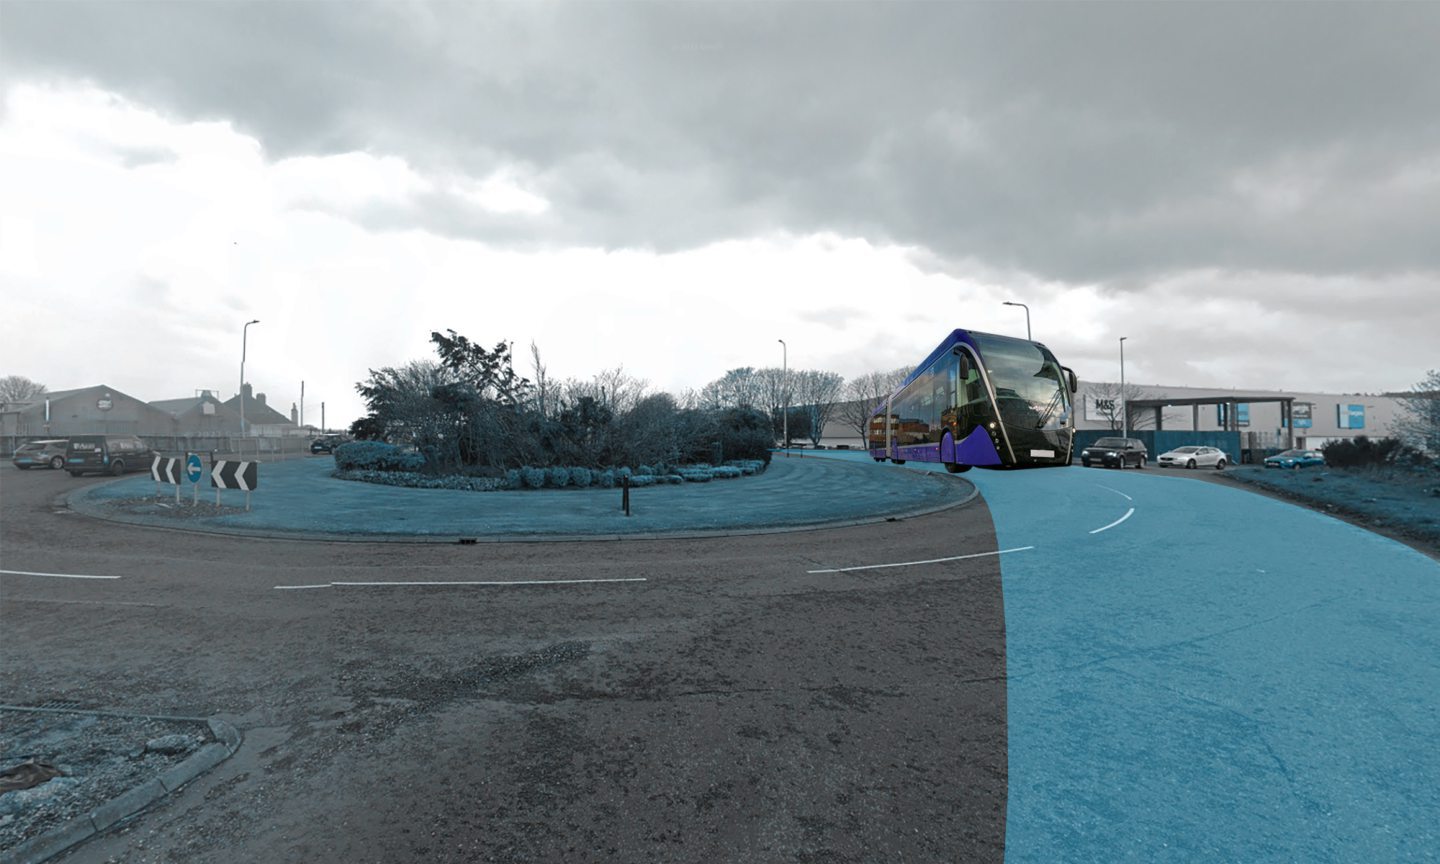 An impression of what the ART could look like on the Murcar Roundabout in Aberdeen